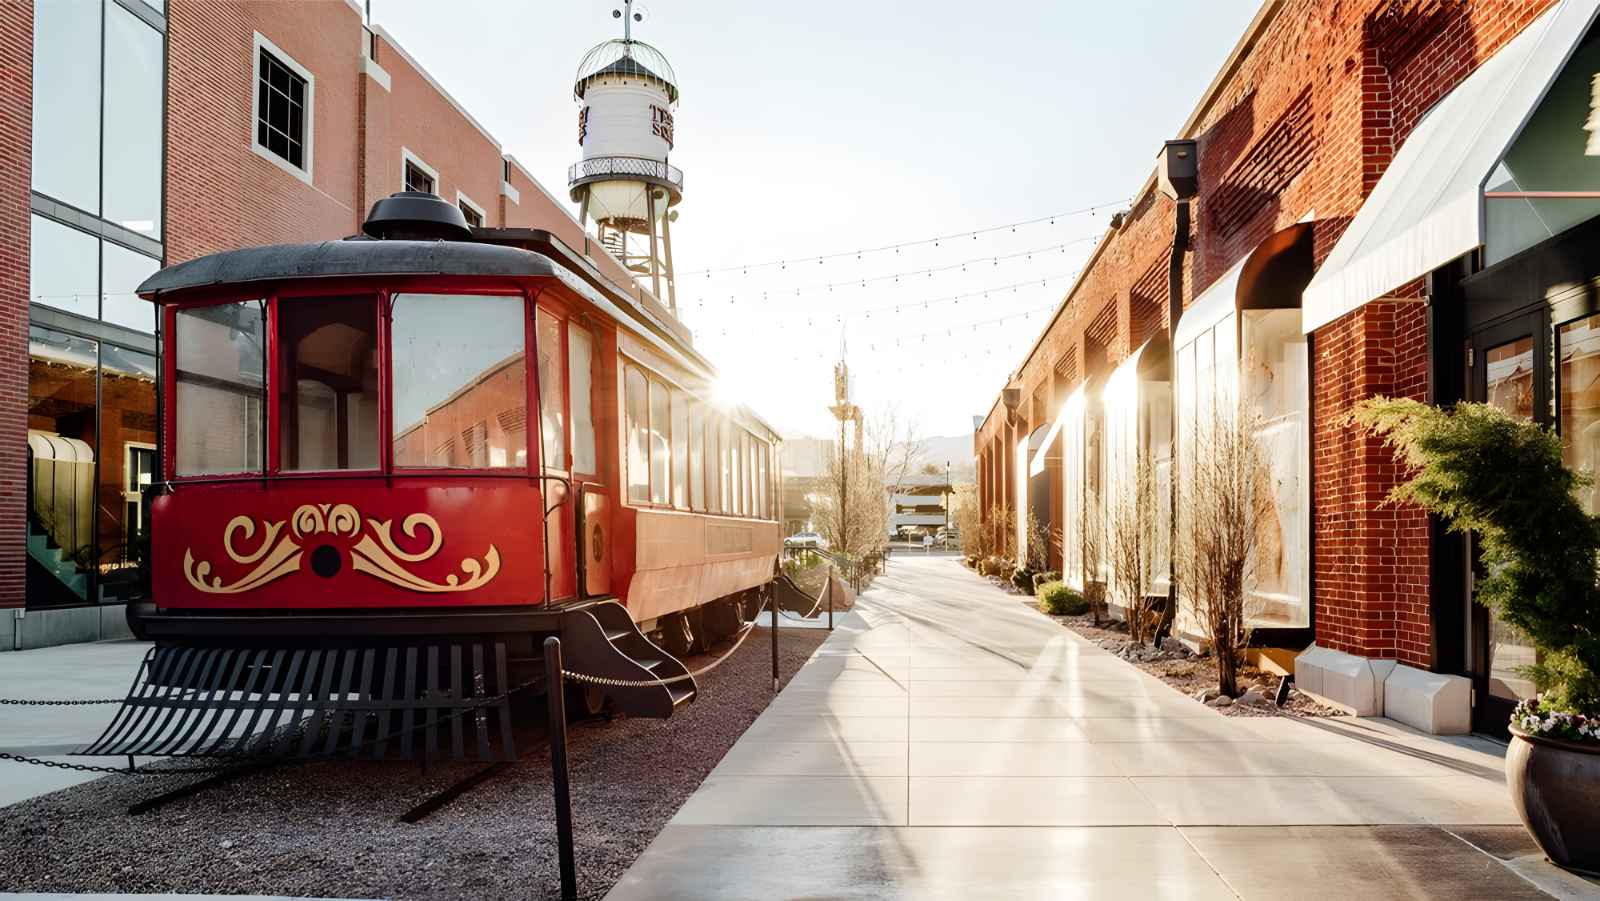 Things to do in Salt Lake City - Trolley Square